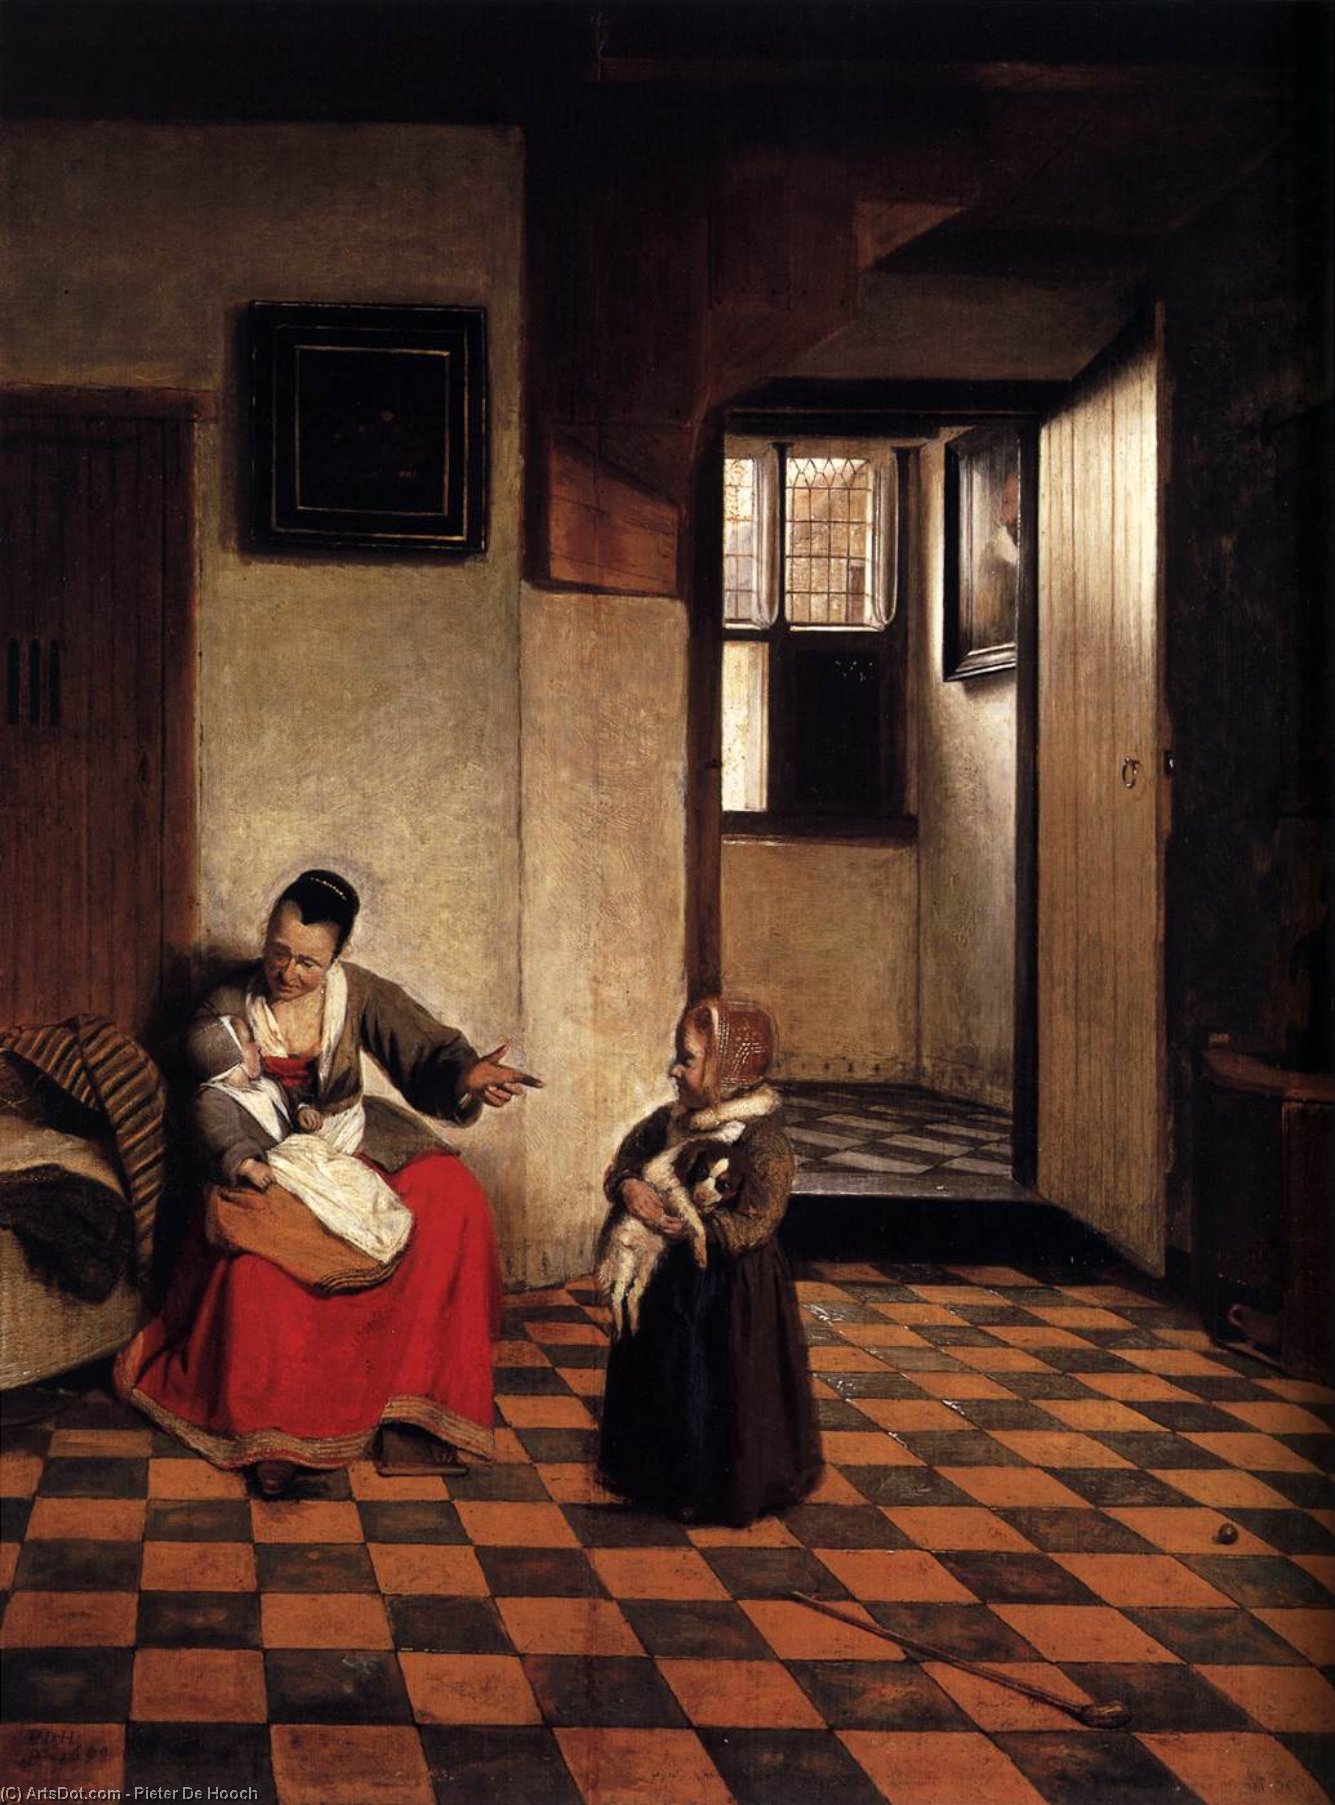 WikiOO.org - Güzel Sanatlar Ansiklopedisi - Resim, Resimler Pieter De Hooch - A Woman with a Baby in Her Lap, and a Small Child